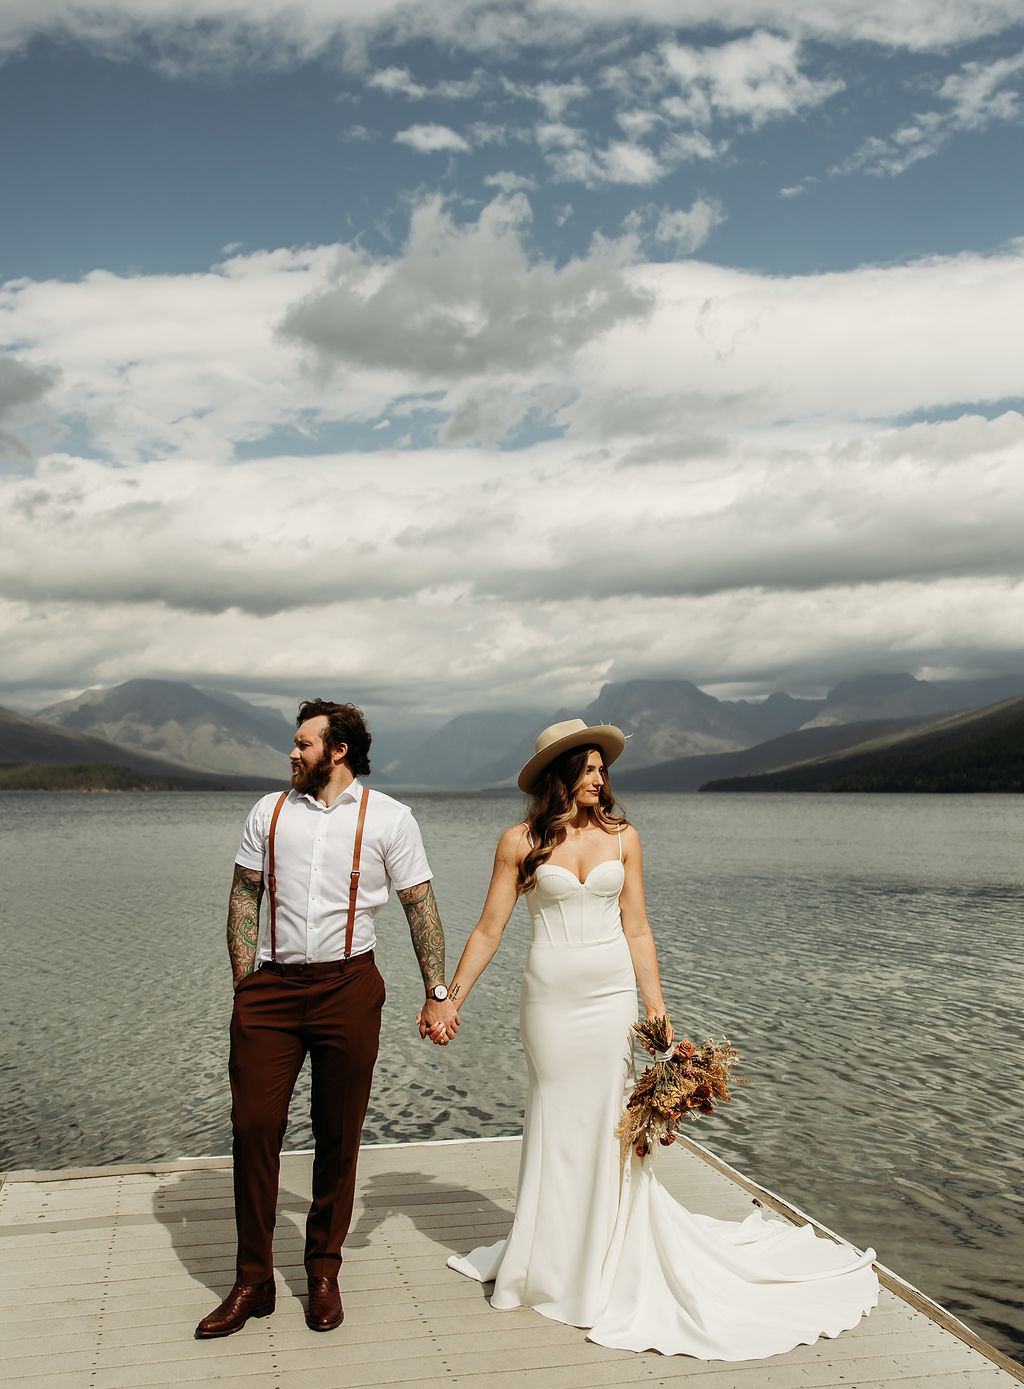 A couple stands on a dock by a lake; the man, in a white shirt and sunglasses, gently touches the woman's face. She holds a bouquet and wears a white dress and hat. Mountains and water are in the background.